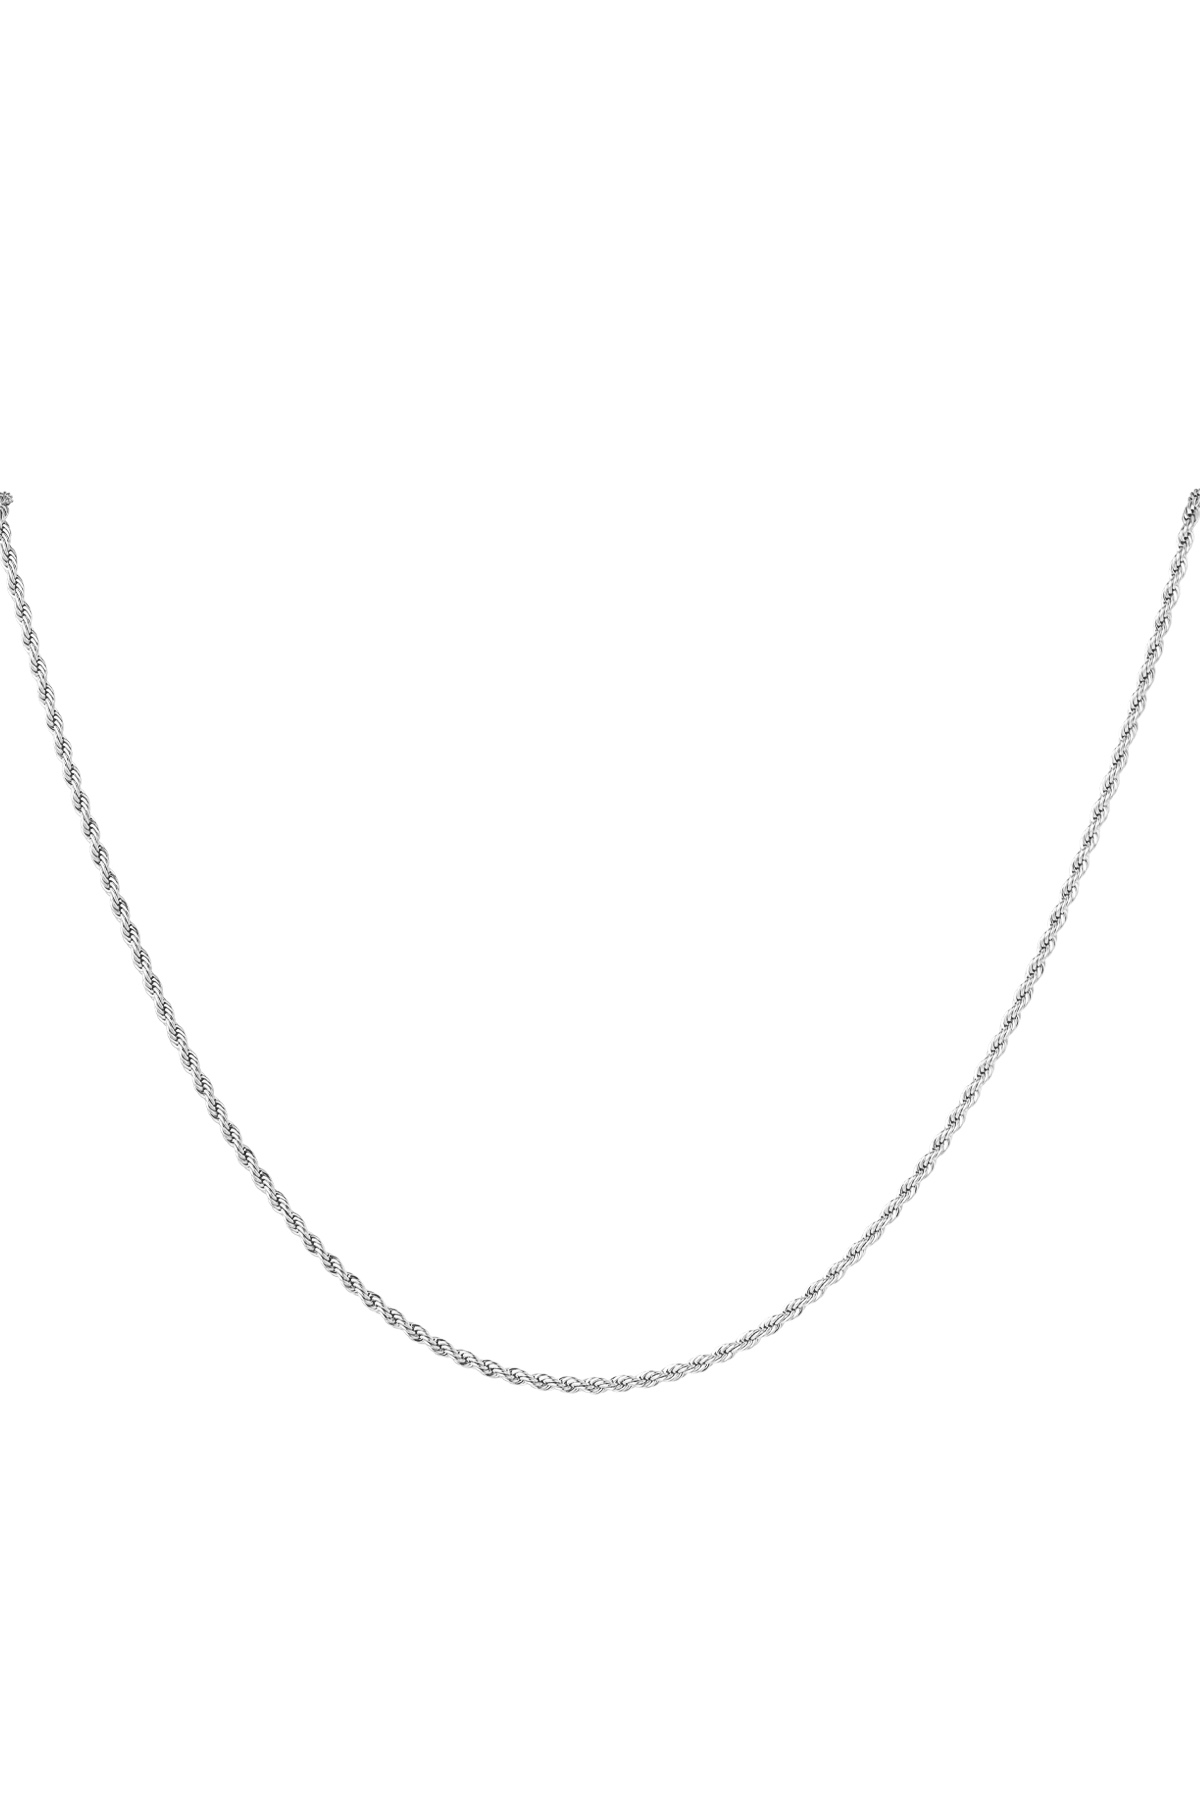 Necklace twisted long - silver - 2.0MM